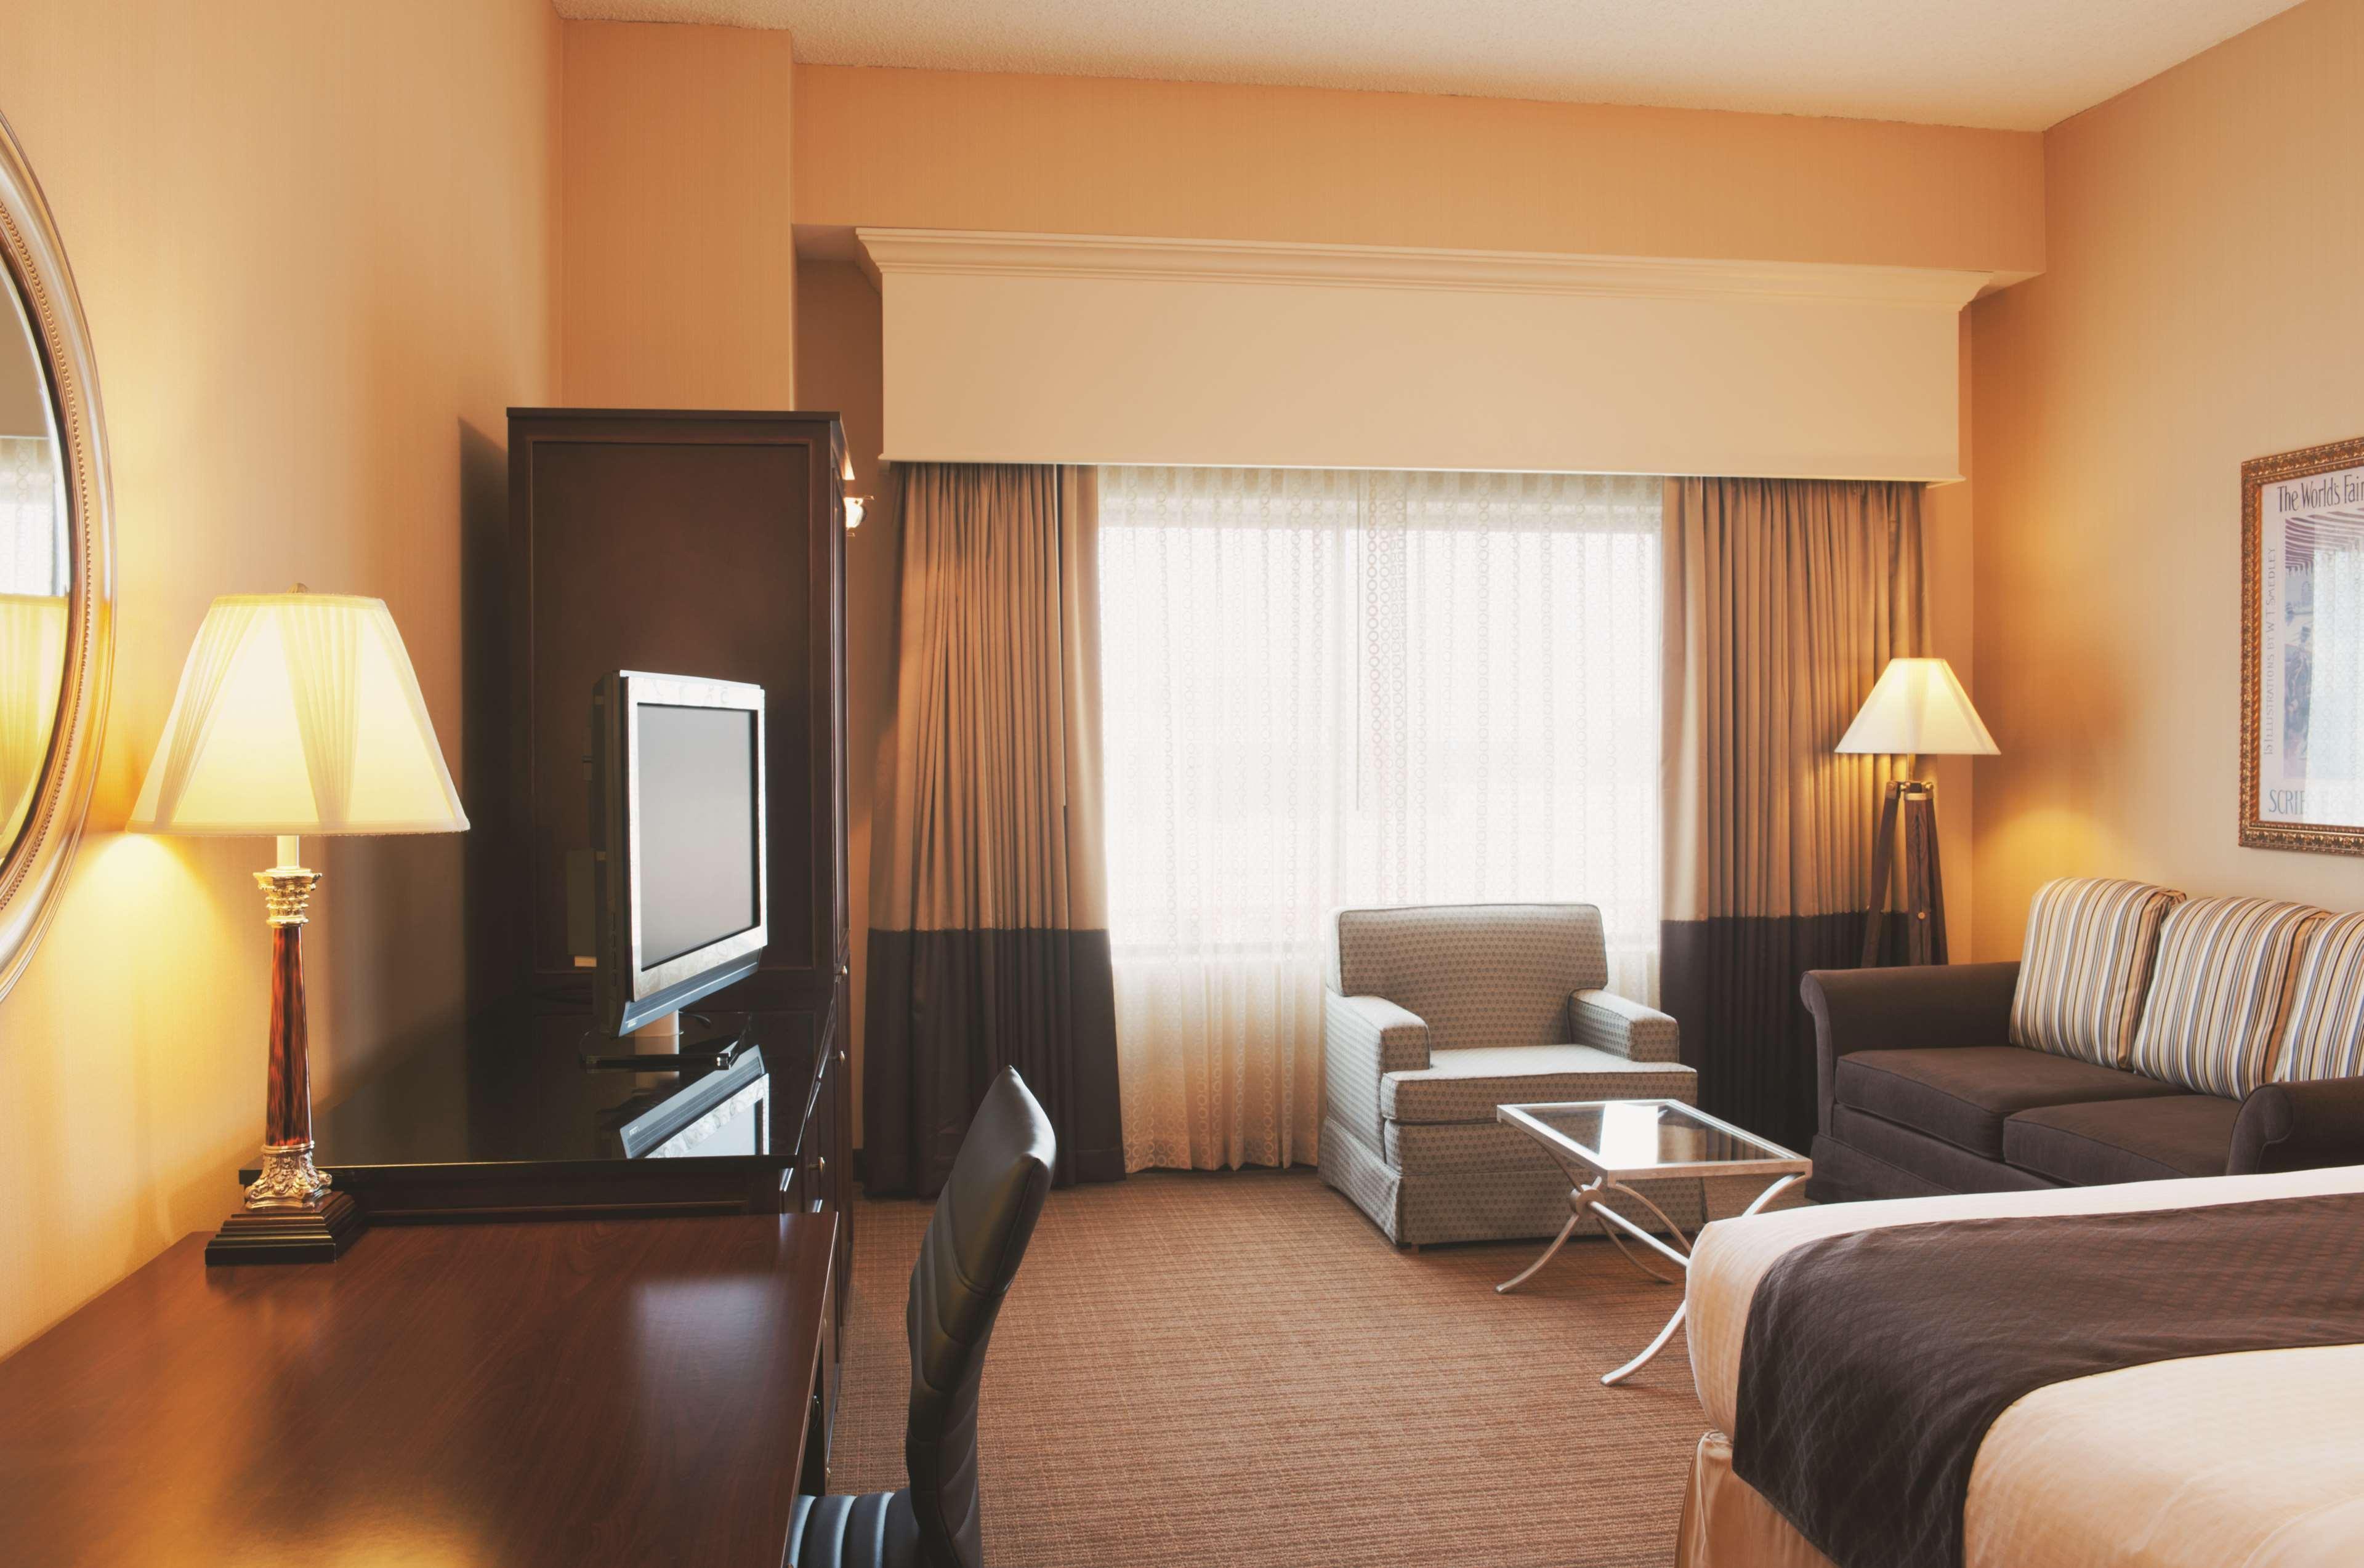 Doubletree By Hilton Chicago O'Hare Airport-Rosemont Hotel Cameră foto